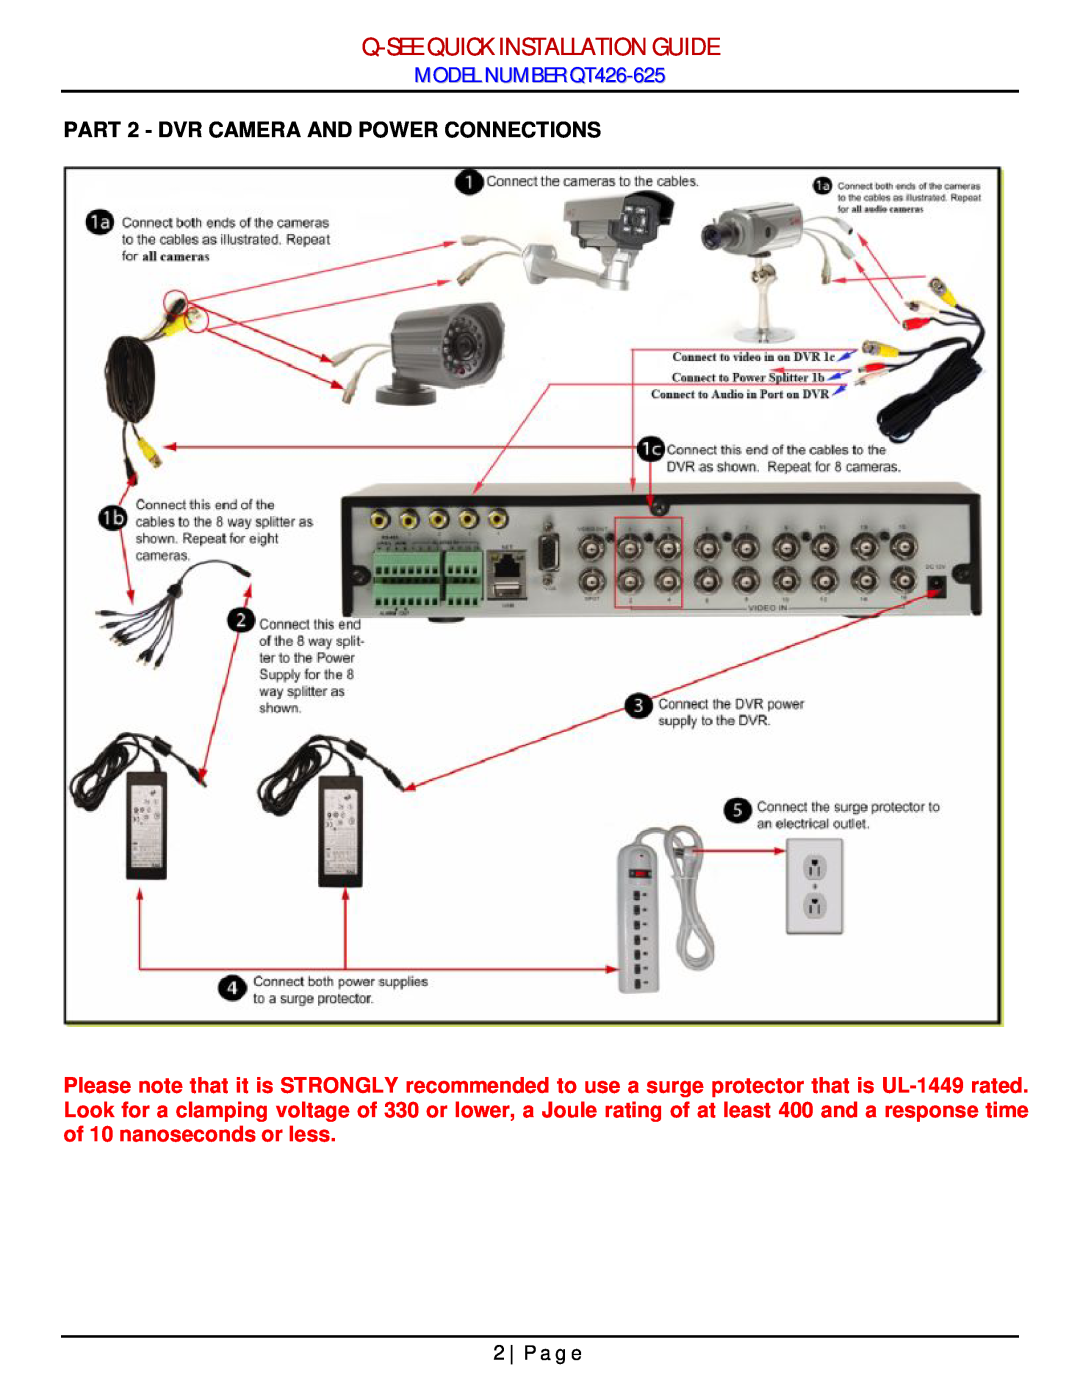 Q-See manual Q-Seequick Installation Guide, MODEL NUMBER QT426-625, PART 2 - DVR CAMERA AND POWER CONNECTIONS, P a g e 